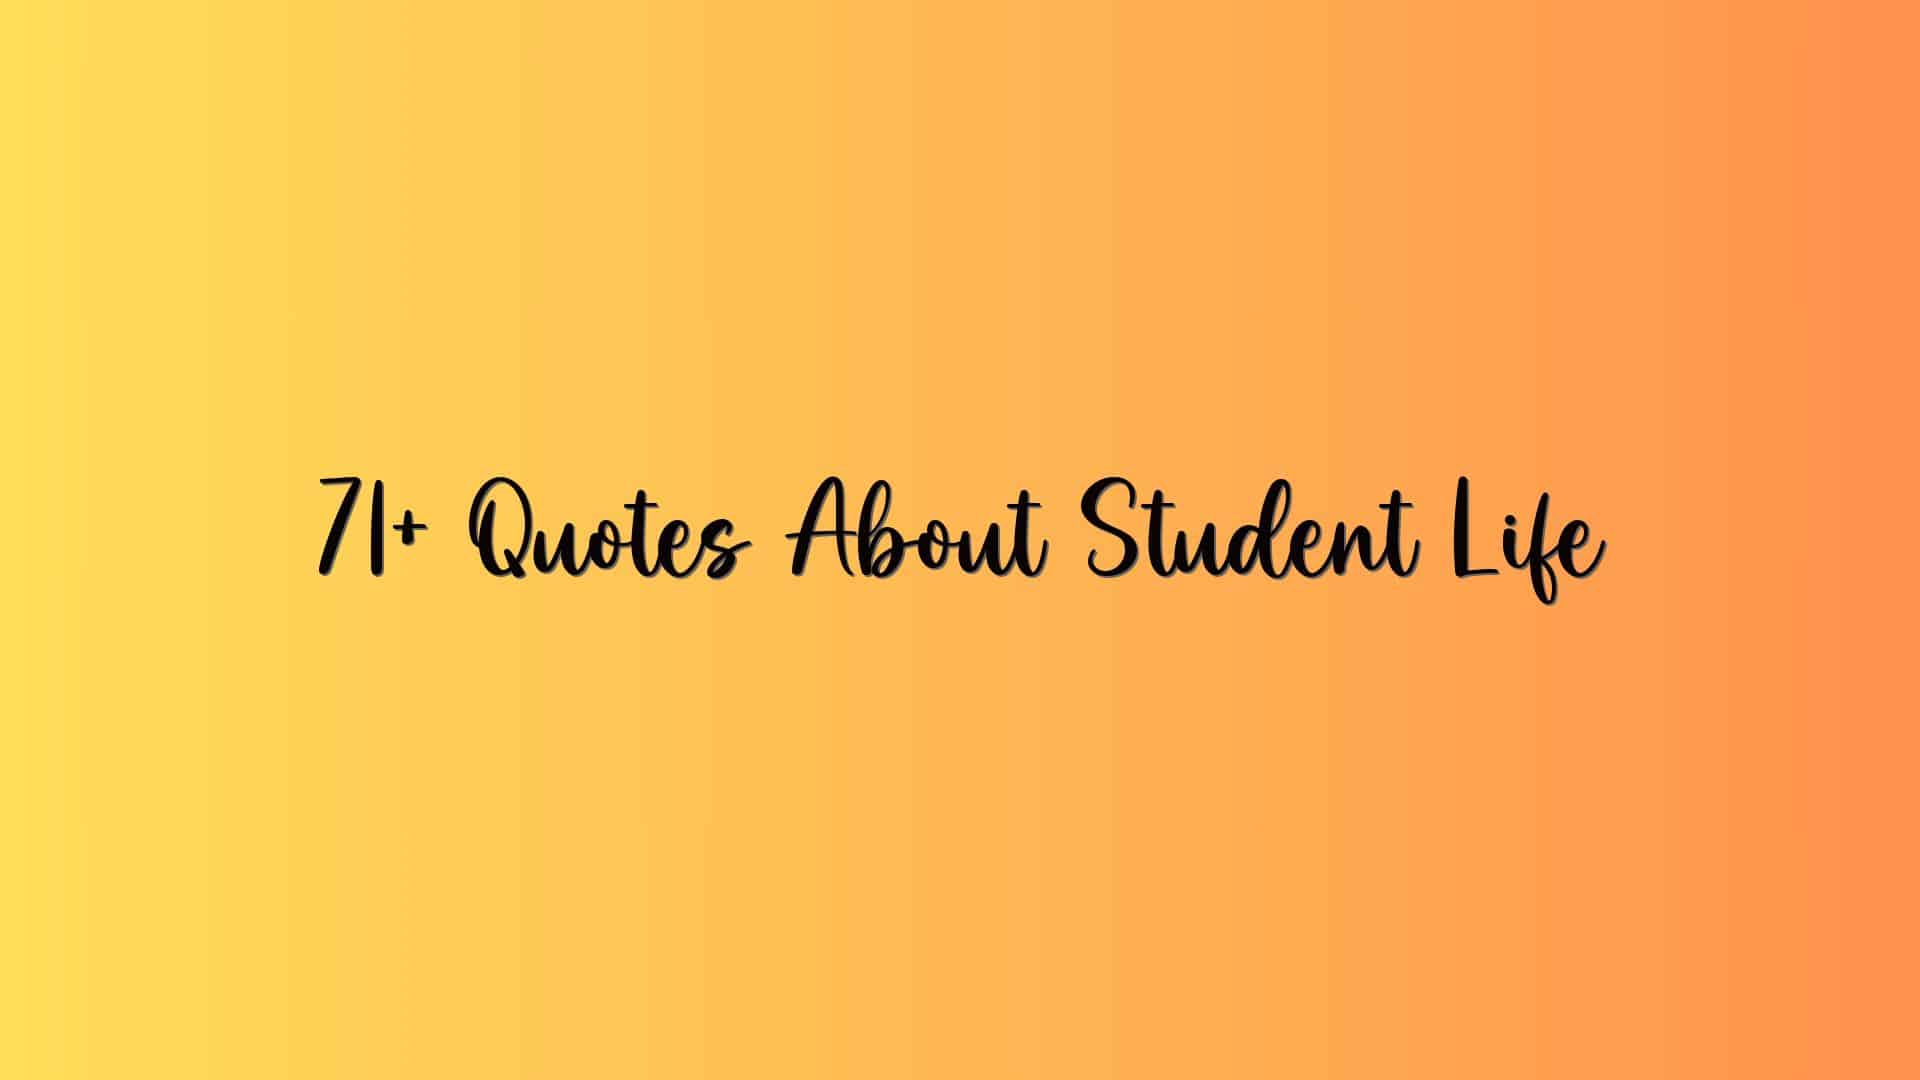 71+ Quotes About Student Life